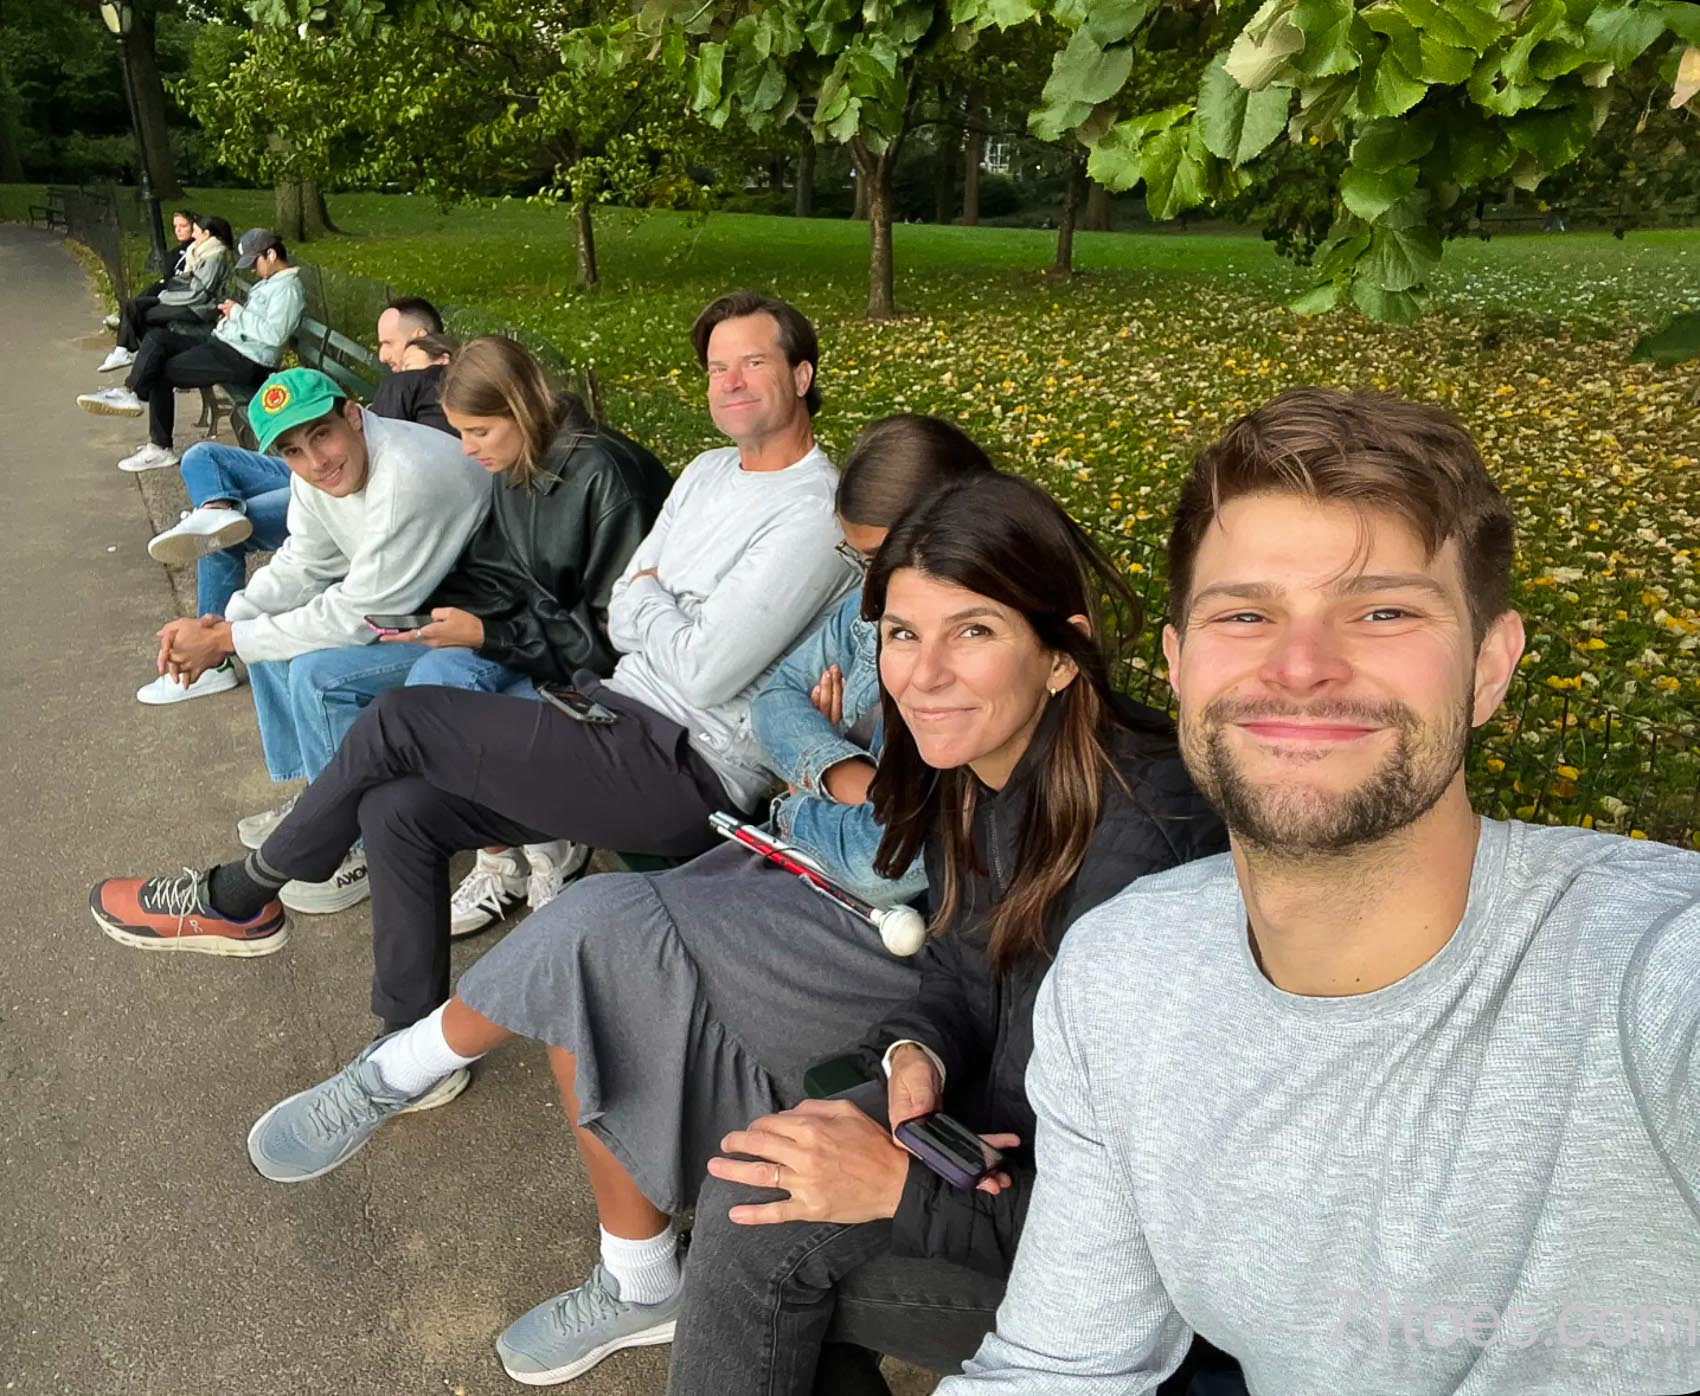 Shawni, David, Max and others sitting in Central park